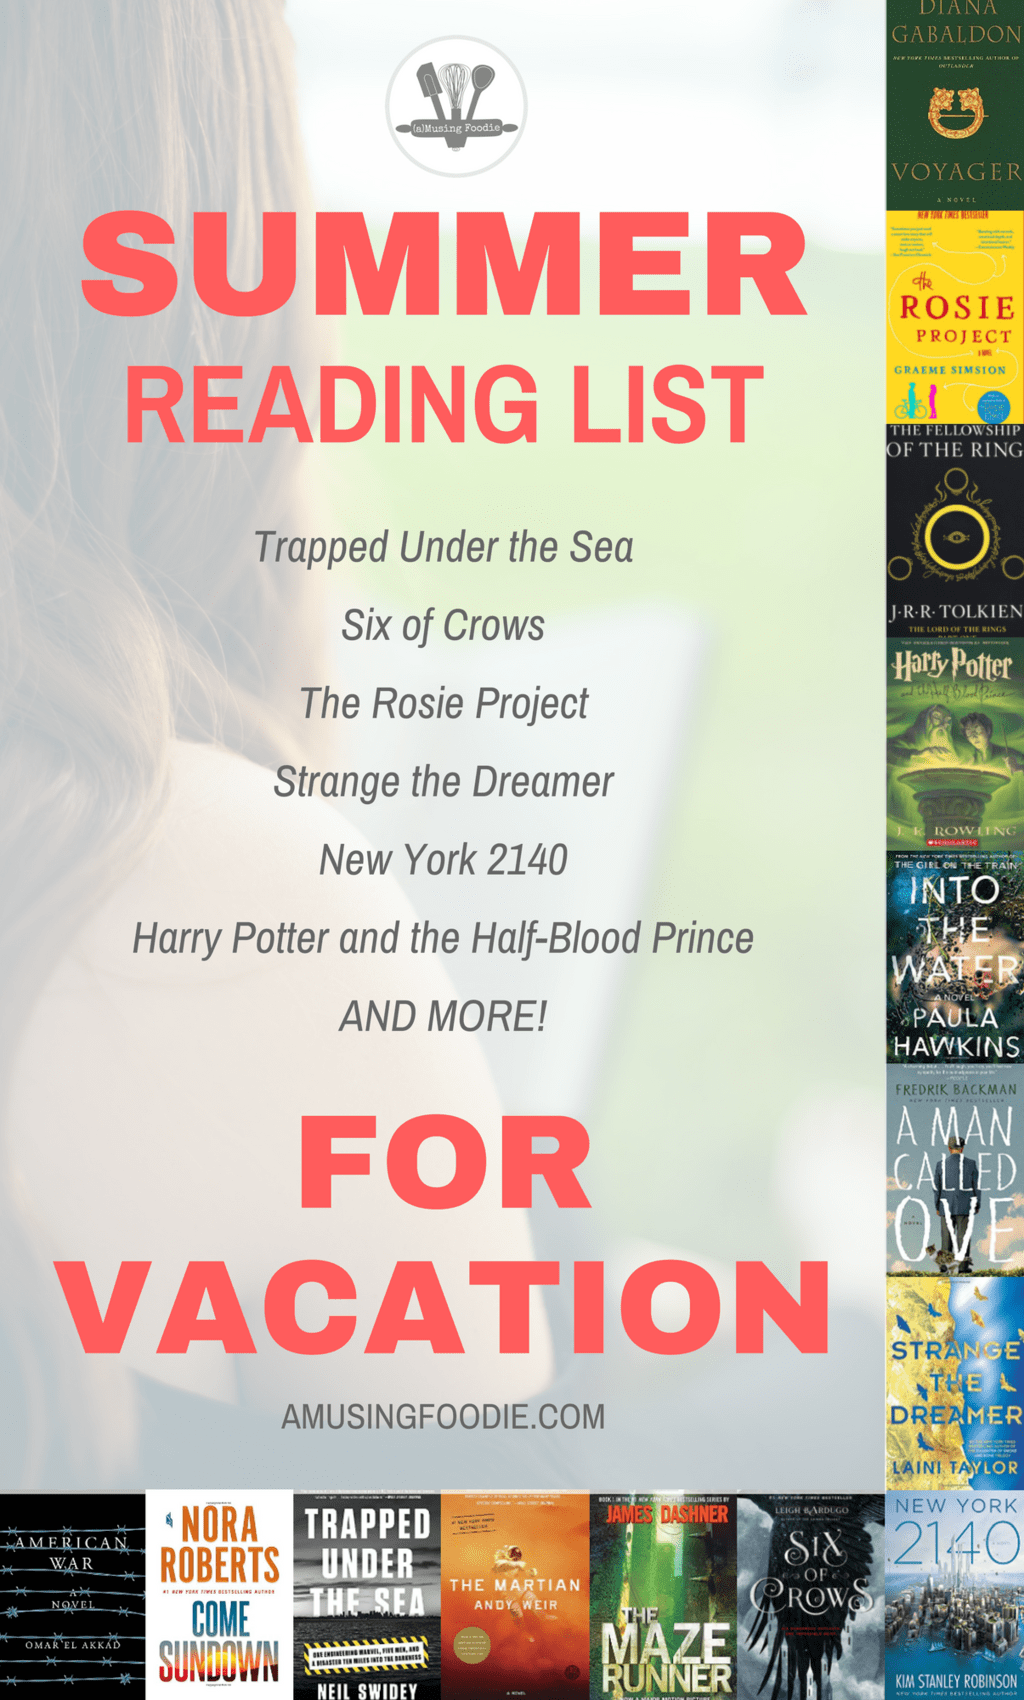 What is it about summer that makes reading seem so much more inviting? I have a long list of books I've been waiting to start, and vacation seems like the best place to dig in!